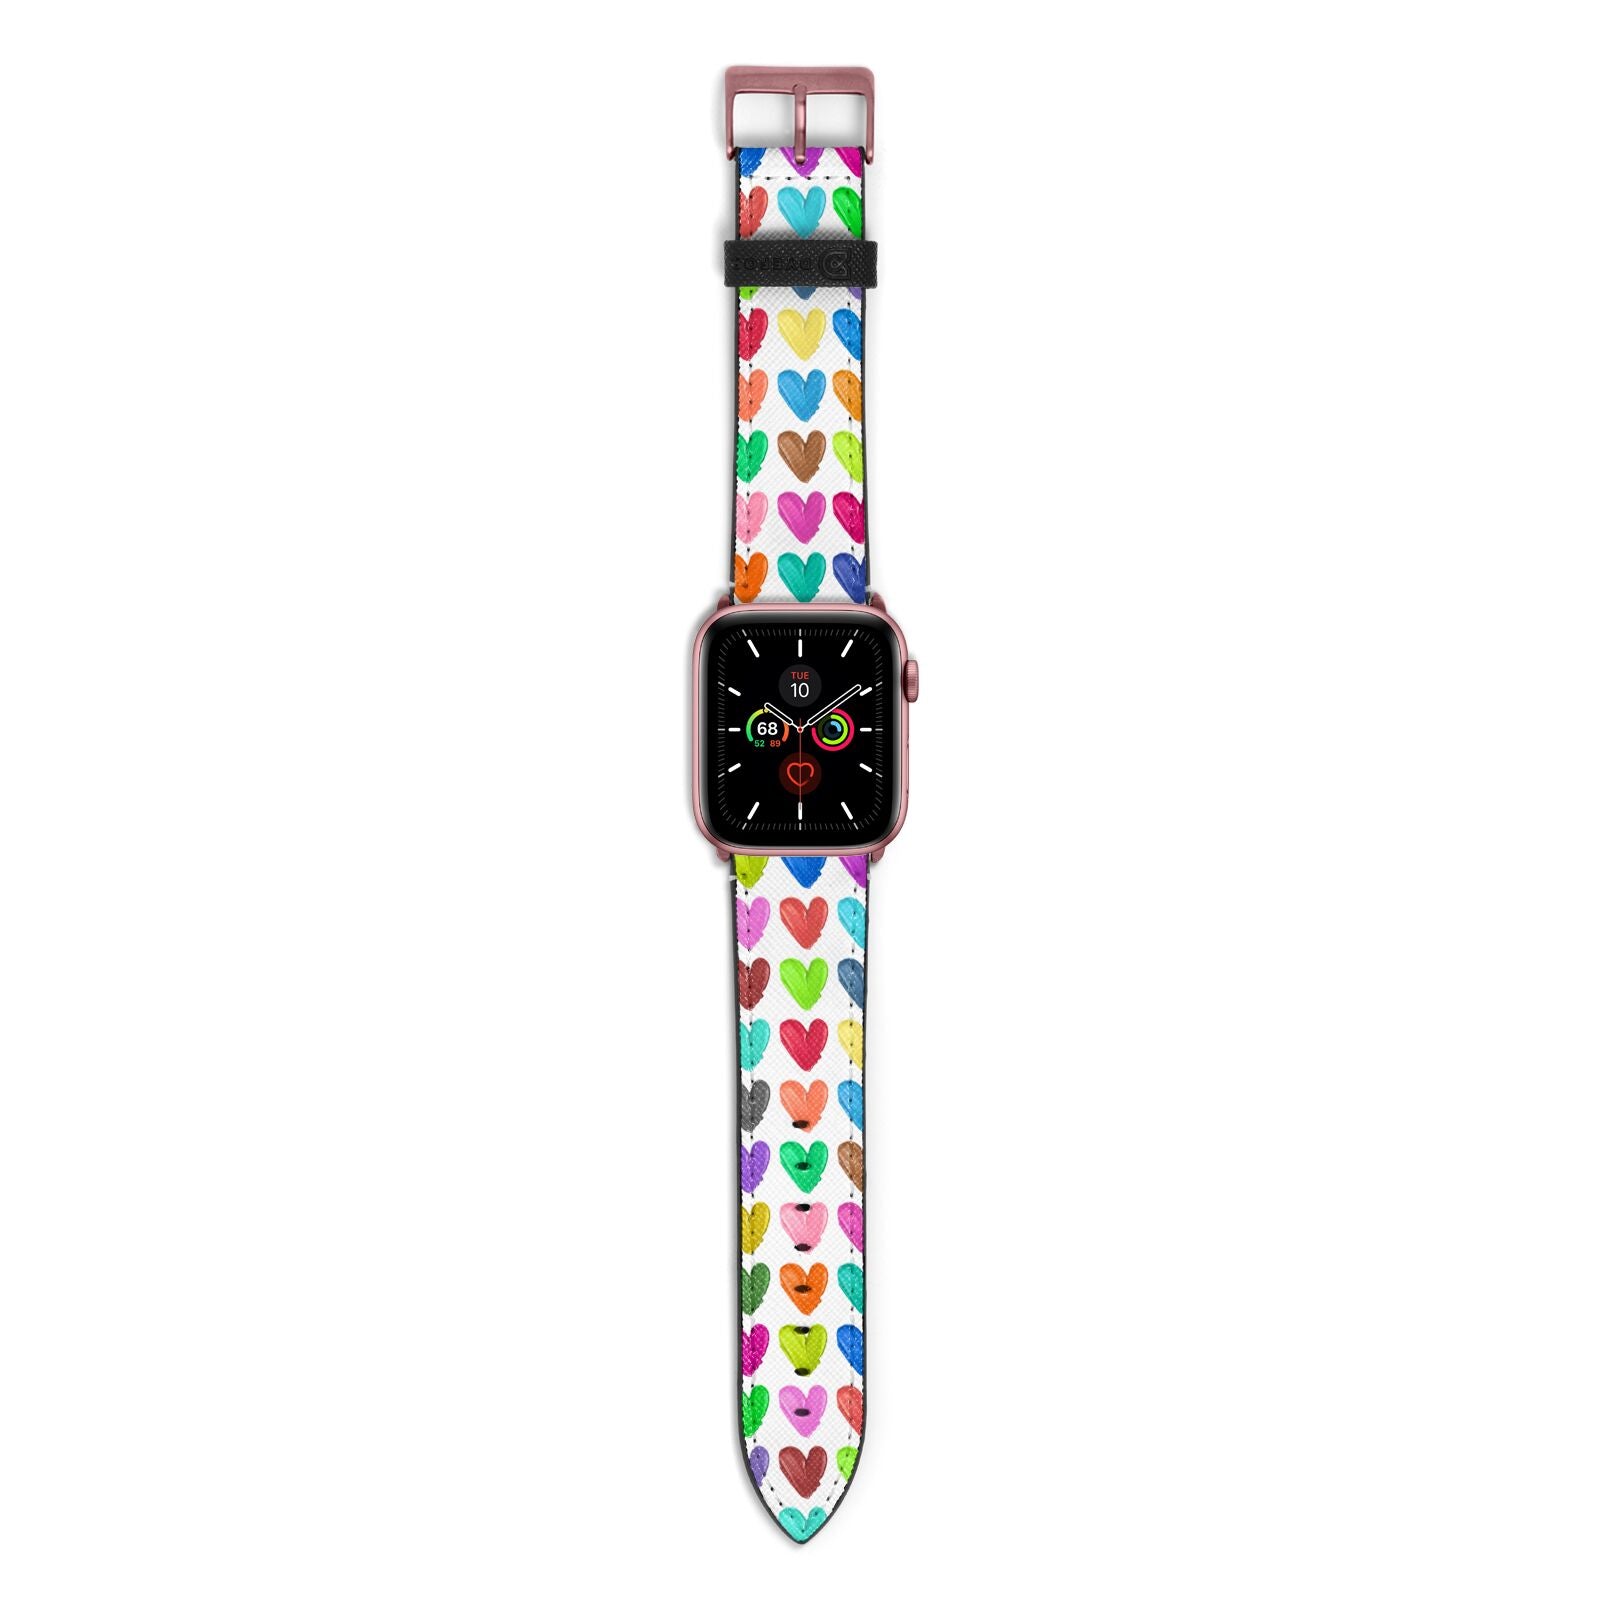 Polka Heart Apple Watch Strap with Rose Gold Hardware